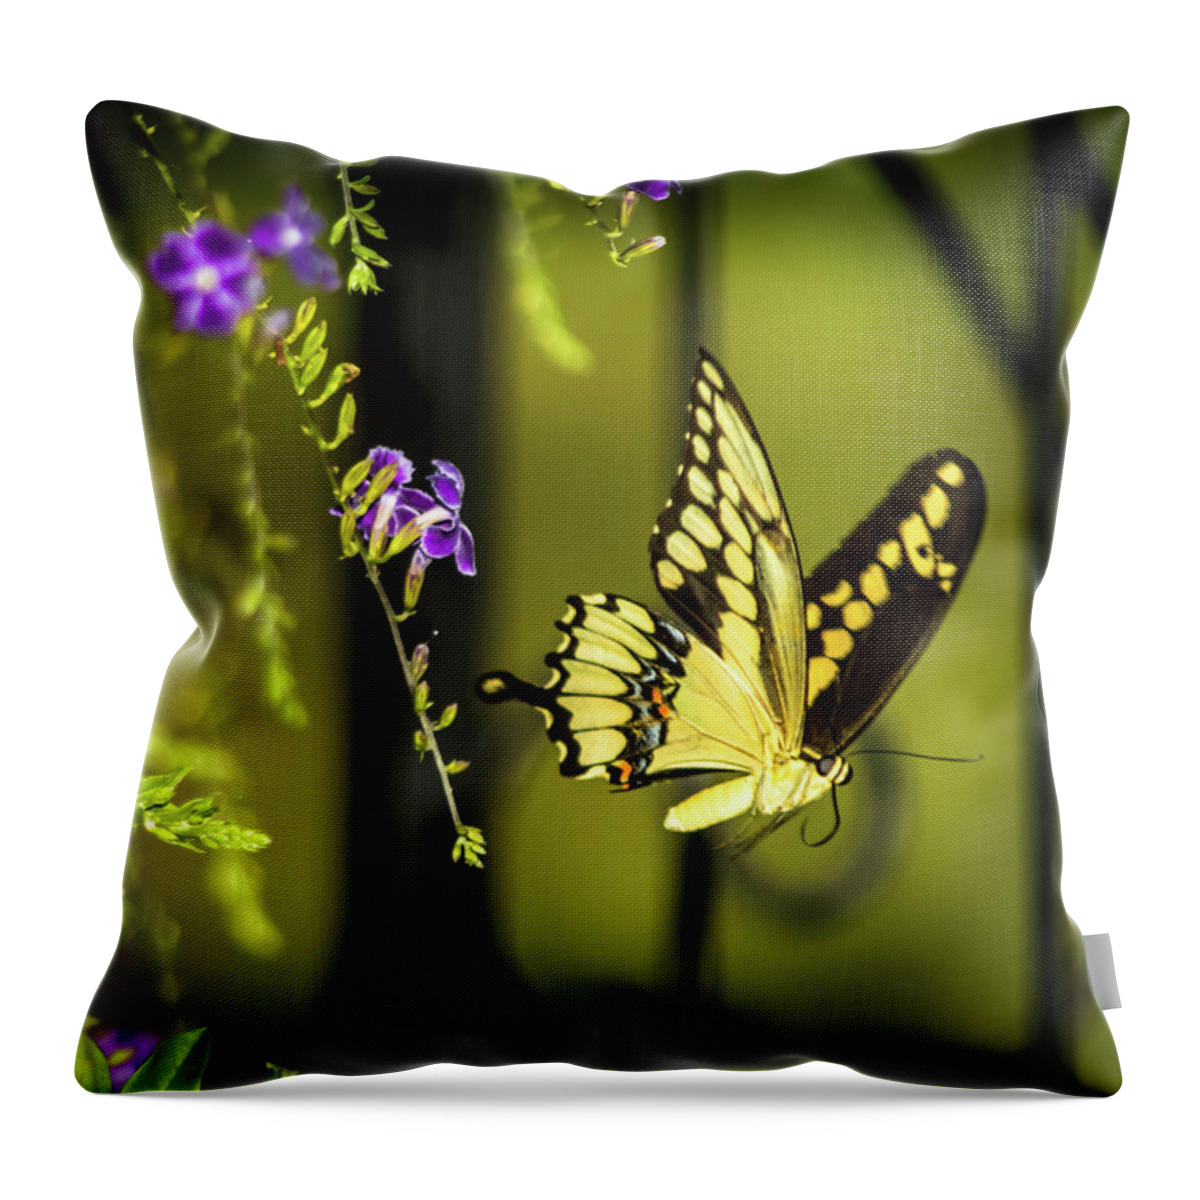 Butterfly Throw Pillow featuring the photograph Done by Leticia Latocki